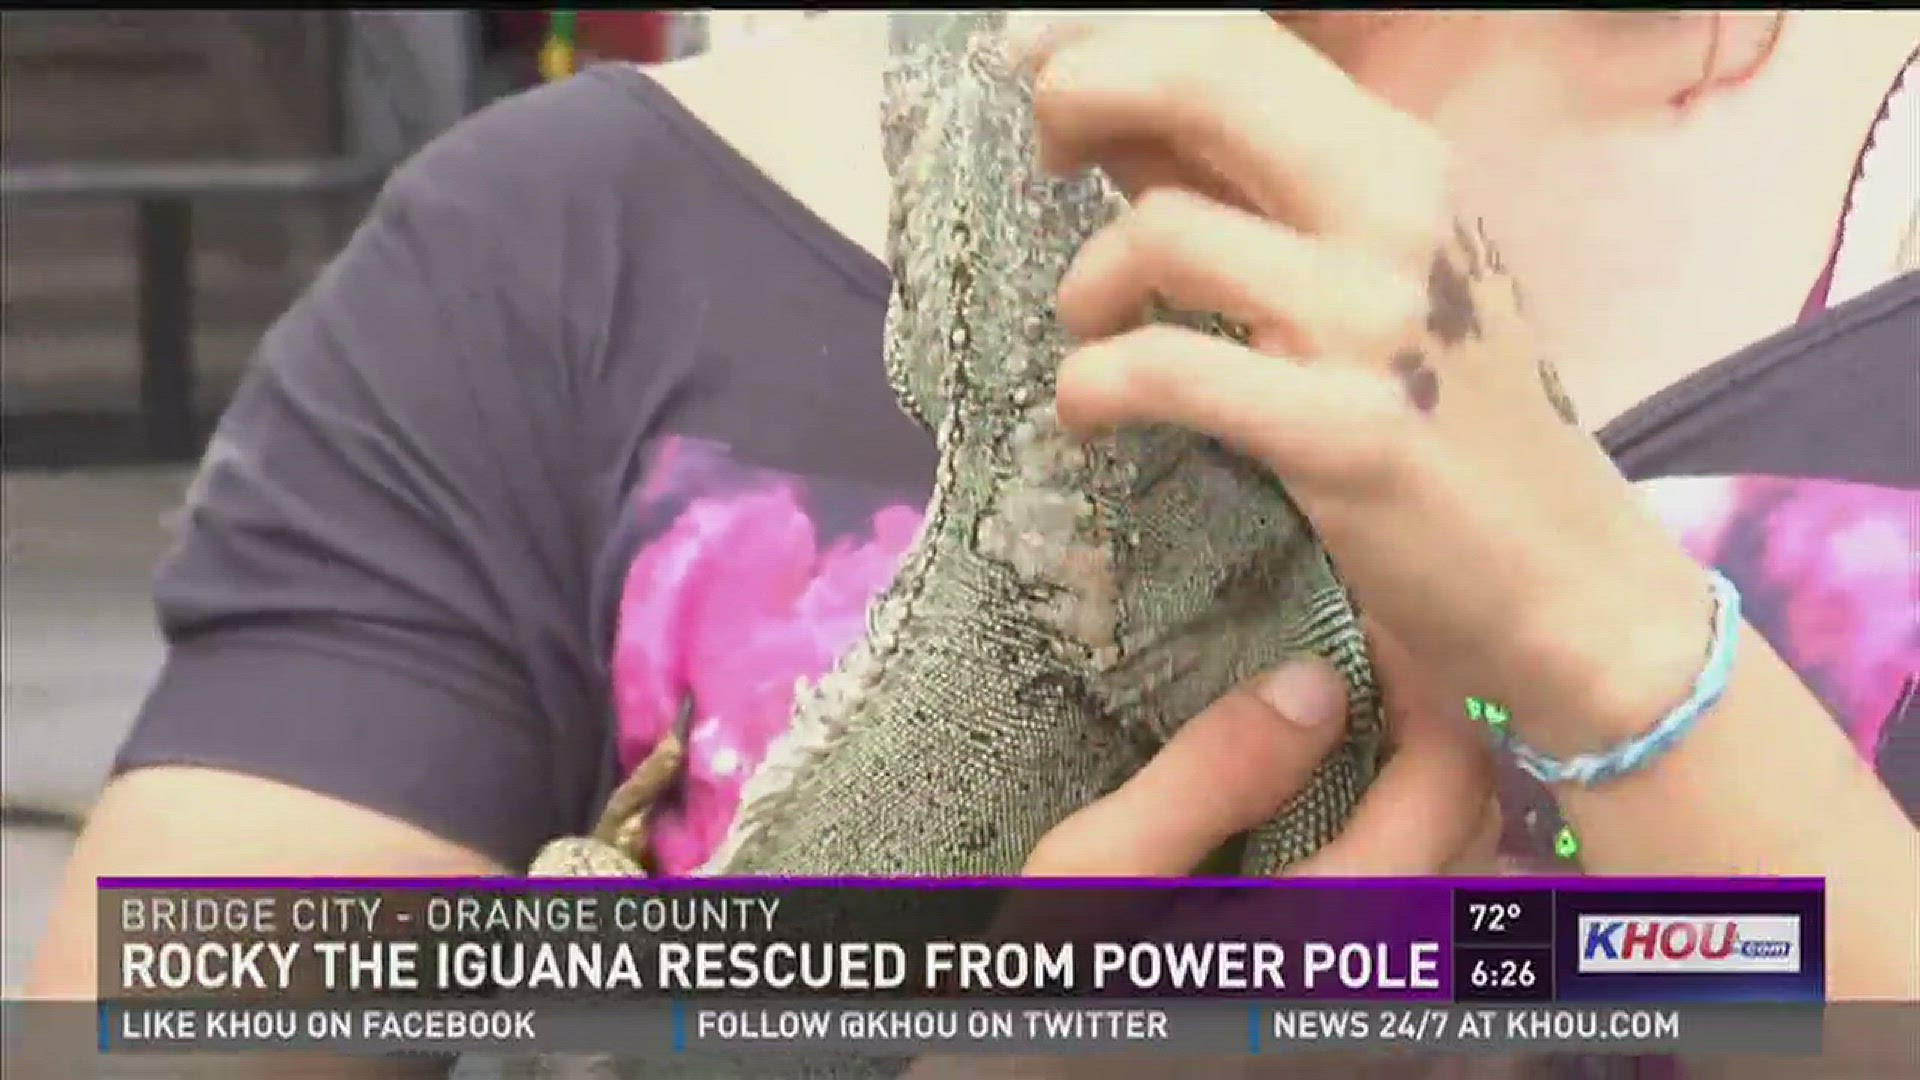 Sarah Wion, who has owned her pet iguana, Rocky, for eight years said that the lizard went missing a couple of days earlier. When she came home Sunday from church, she noticed Rocky at the top of the power line next to her house.